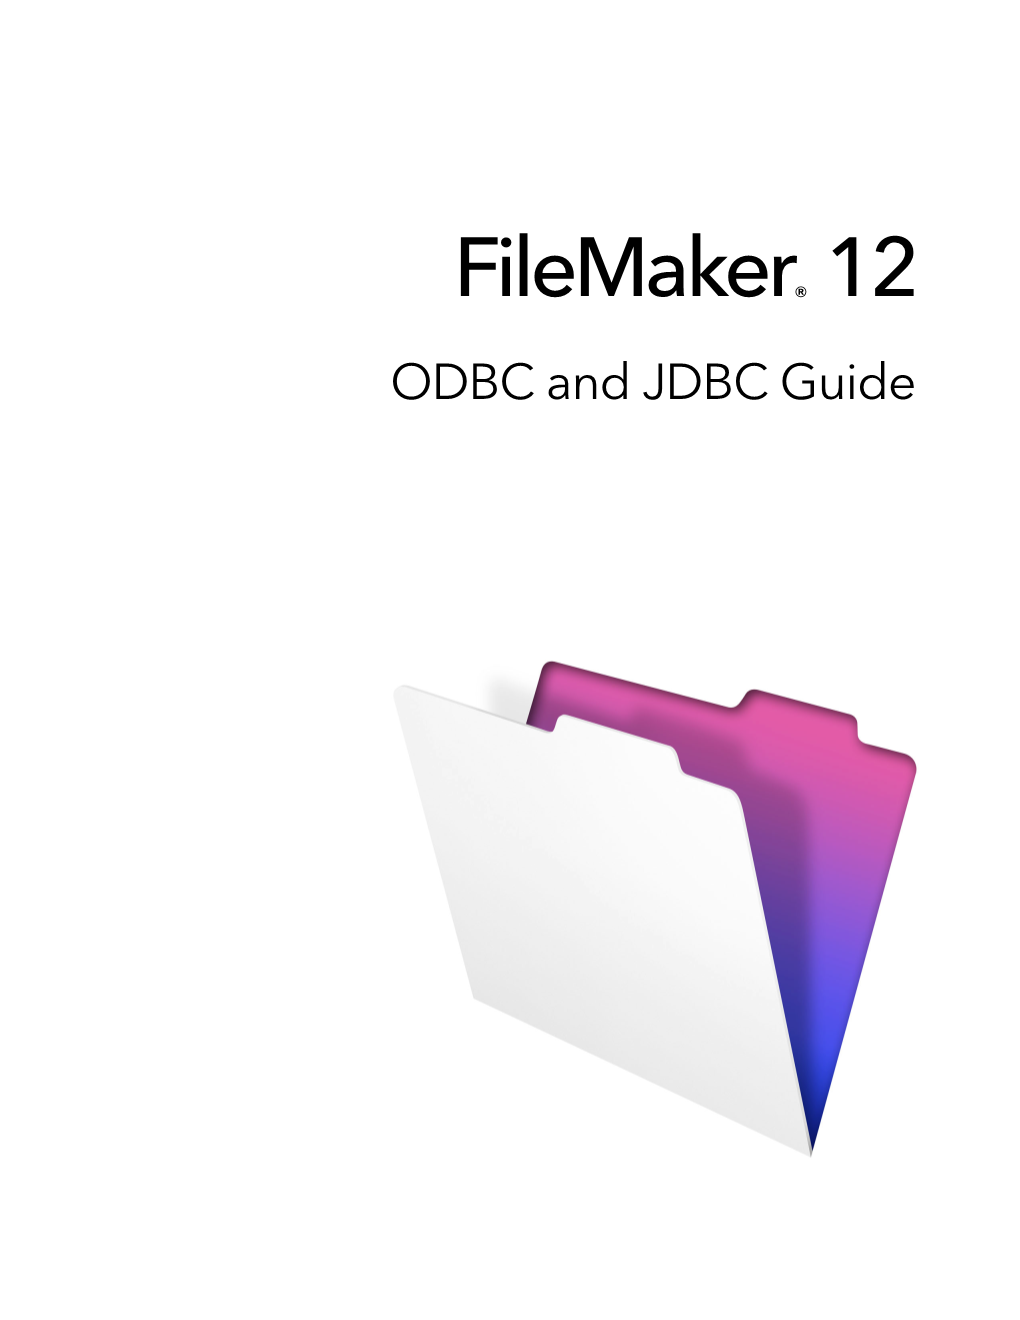 Filemaker 12 ODBC and JDBC Guide